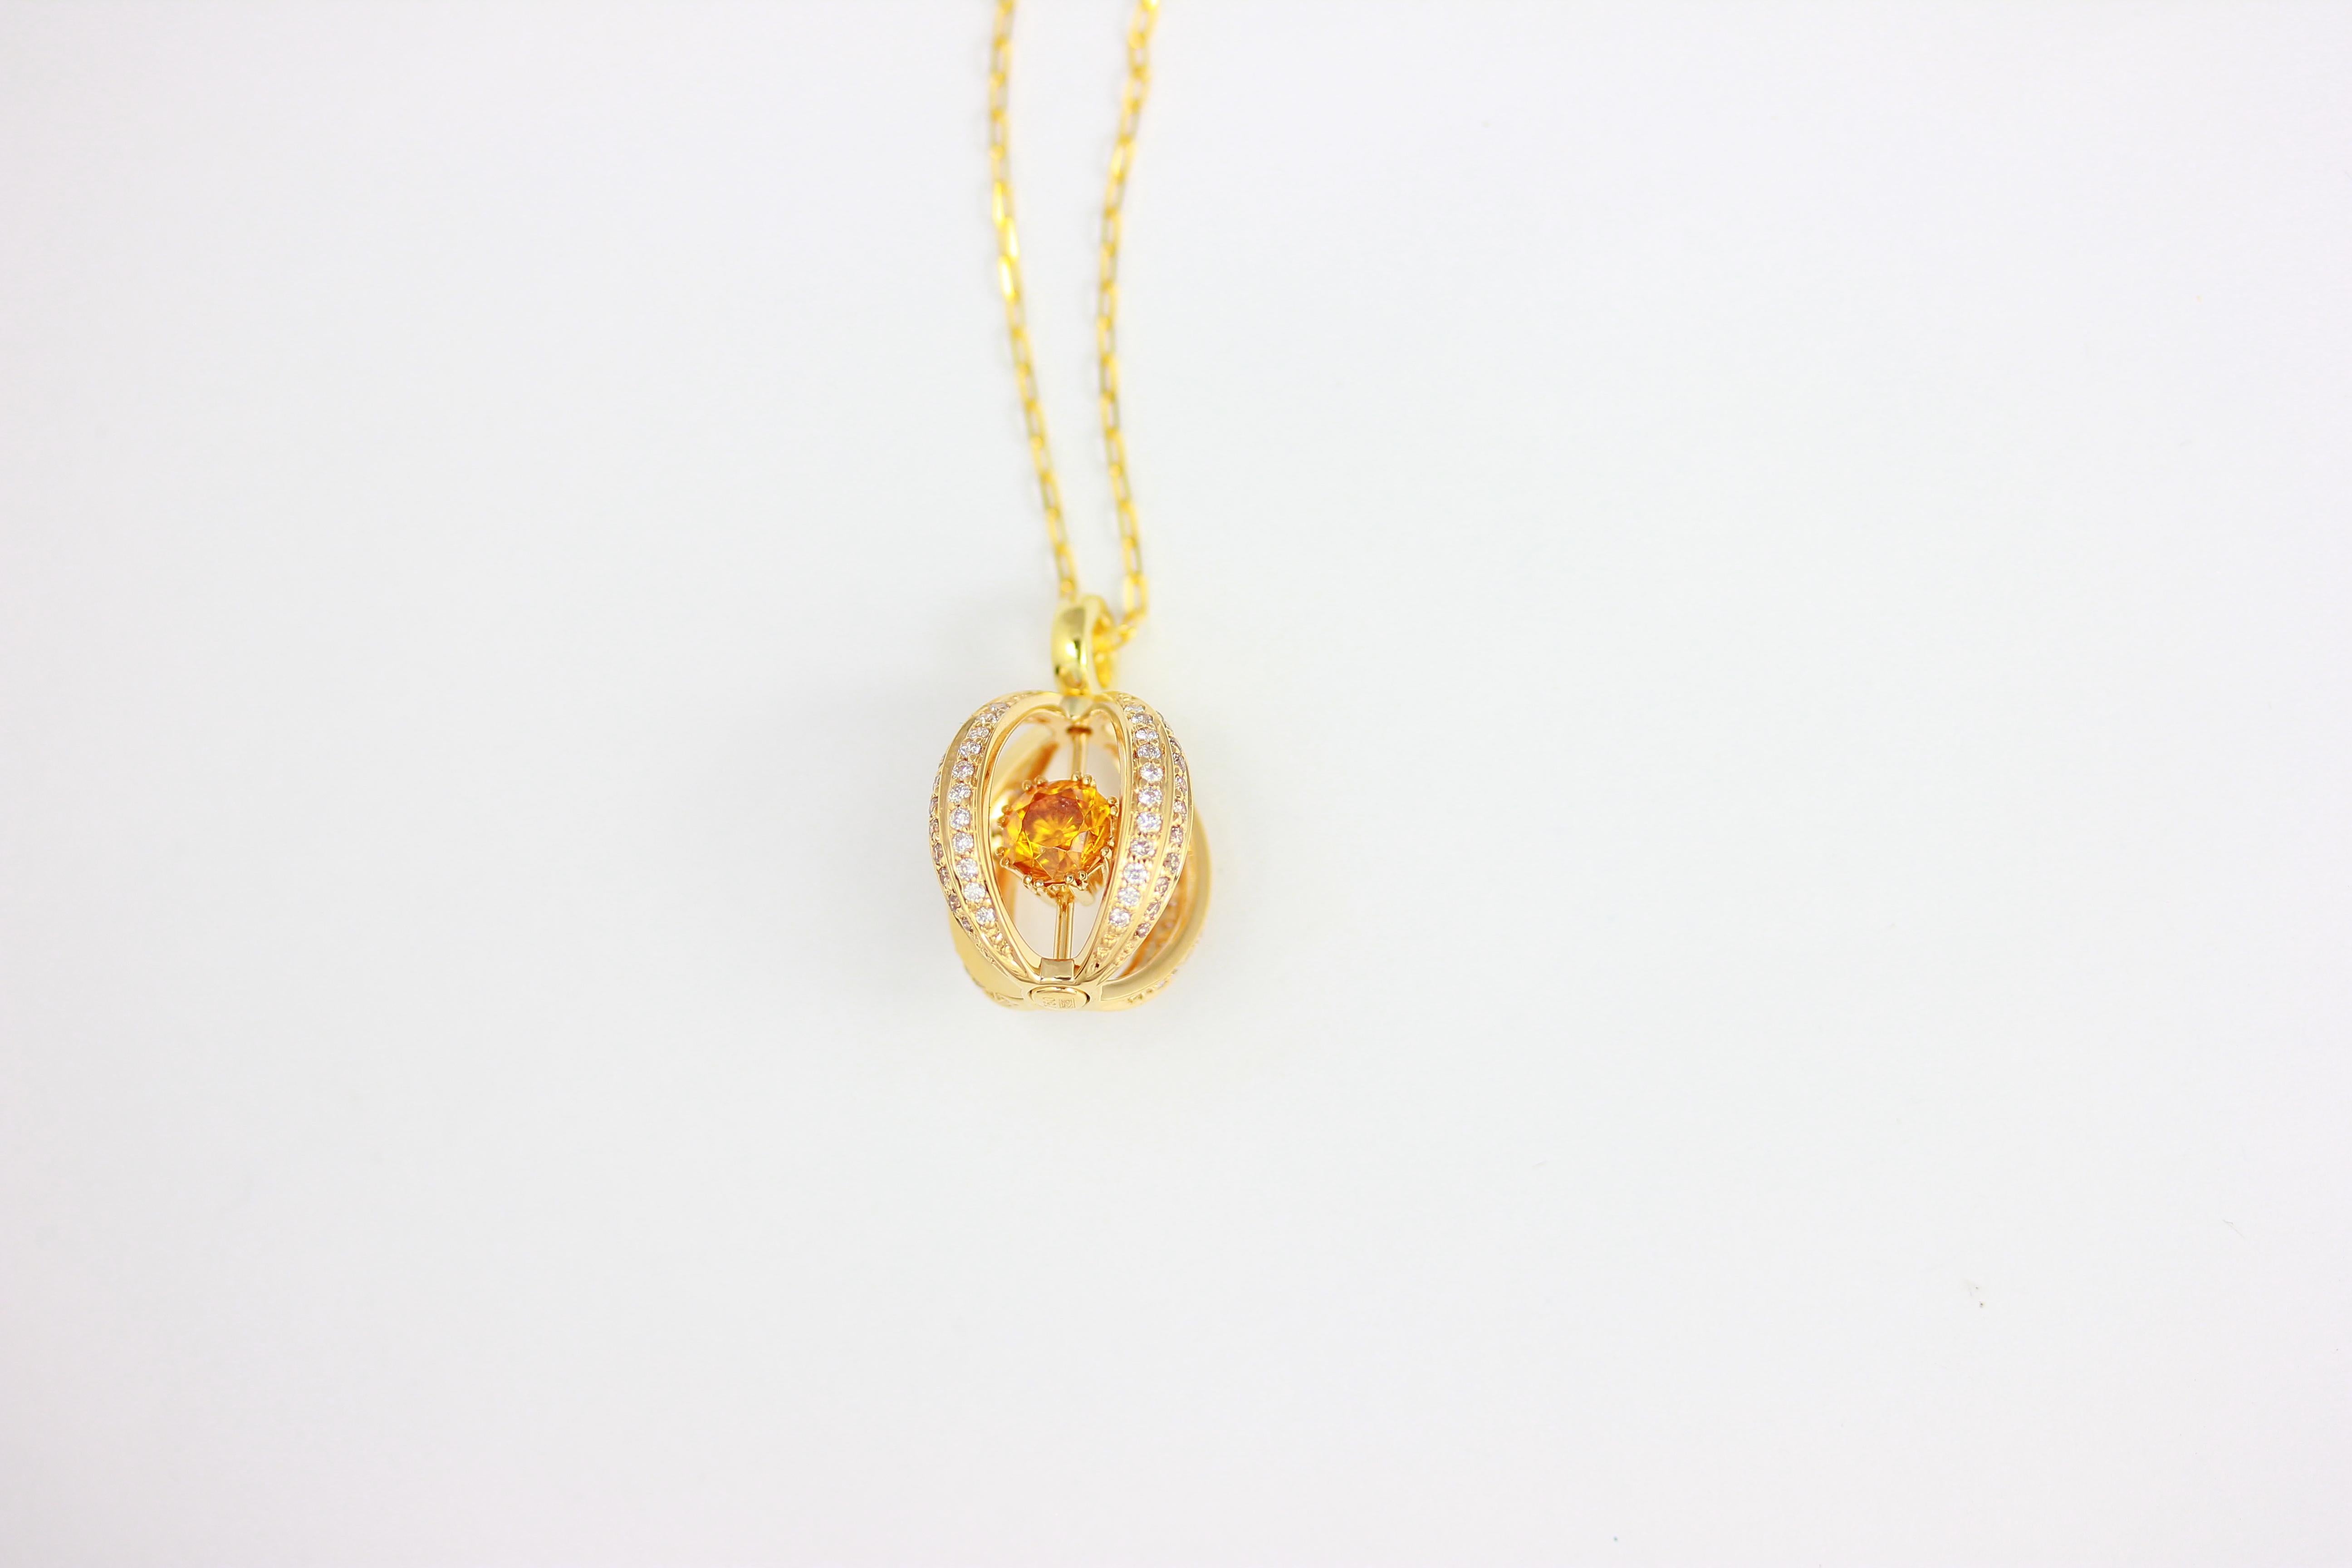 18K YG GOLDEN SPHALERITE, WHITE & CHAMPAGNE DIAMONDS OAK PENDANT WITH 14K CHAIN, SPH 1.32 Carats, WDIA 0.32 Carats, CHDIA 0.32 Carats